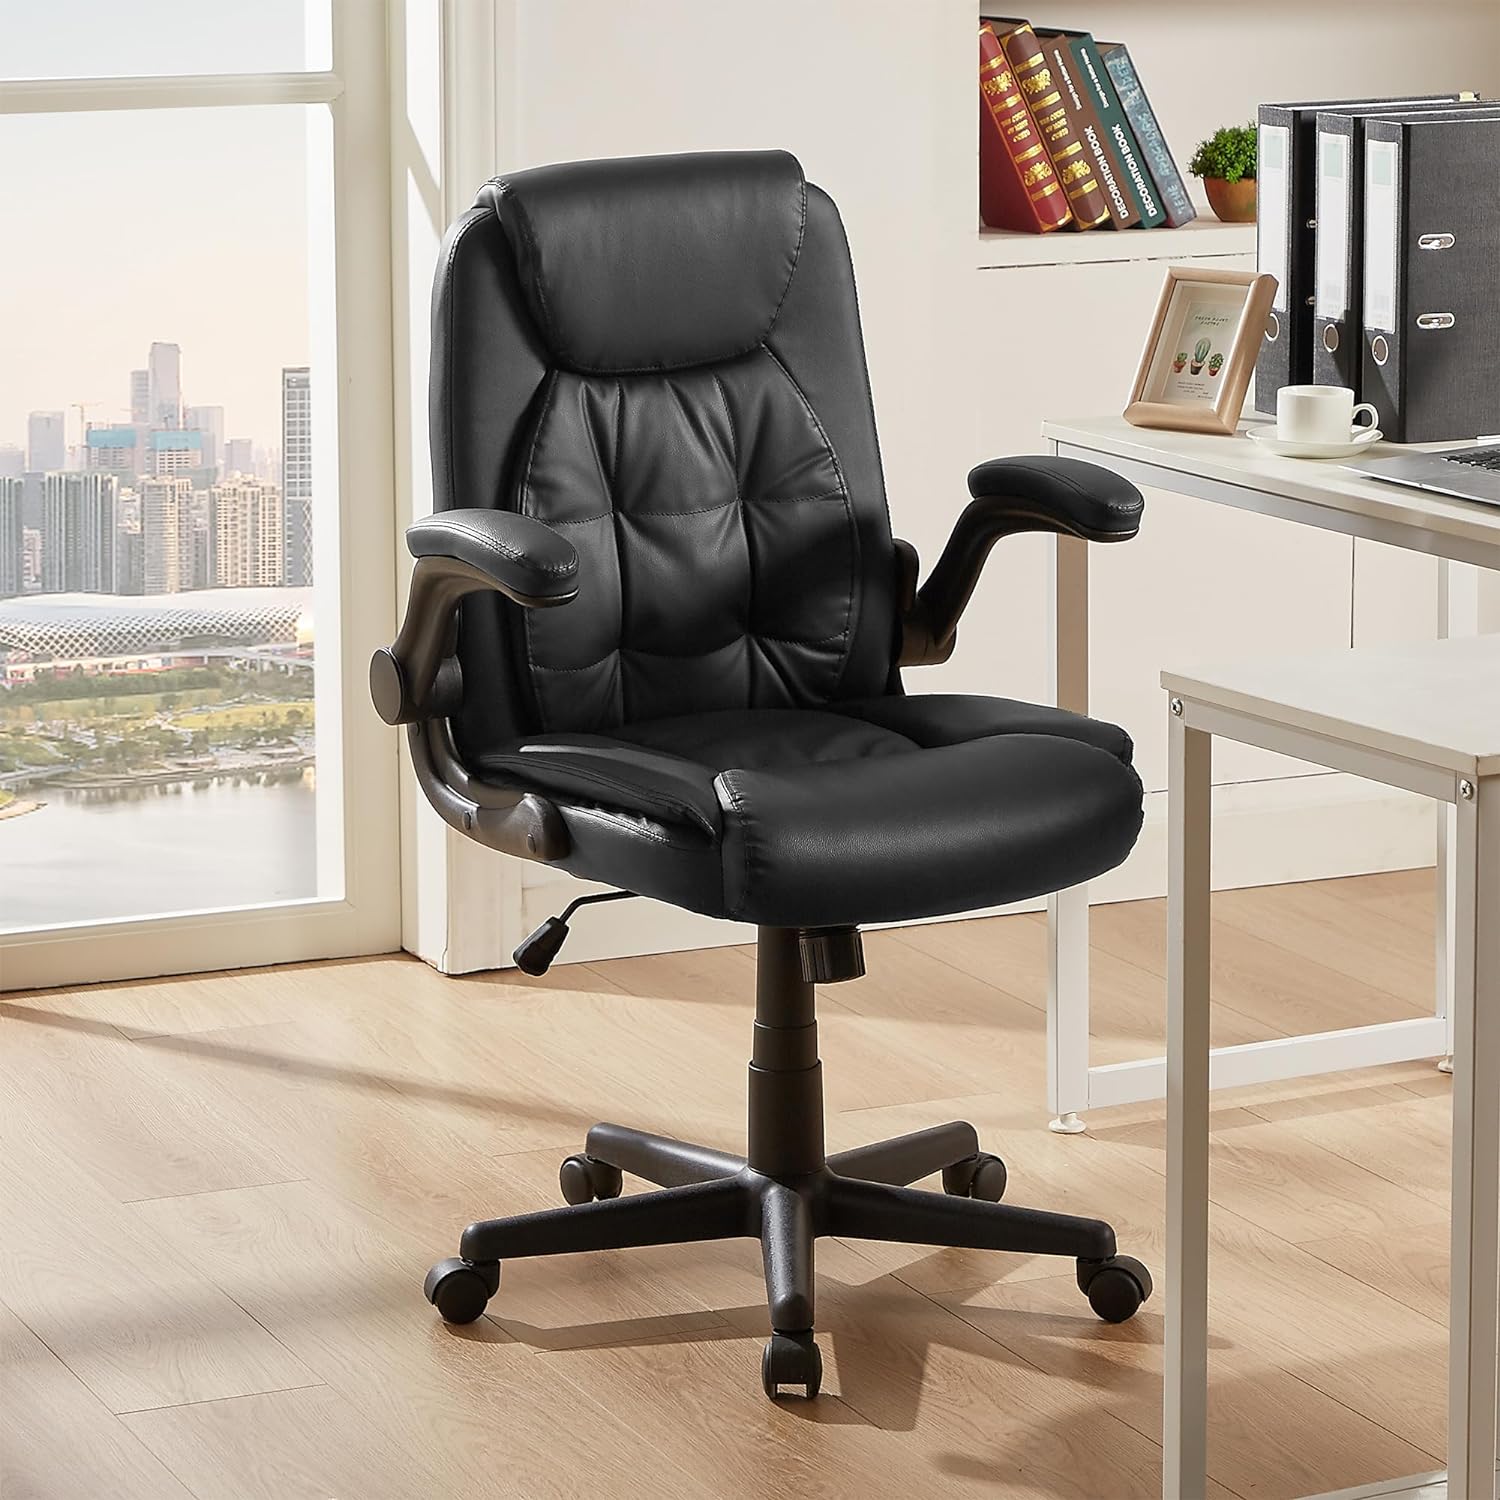 VECELO Executive High-Back PU Leather Computer Desk Chairs